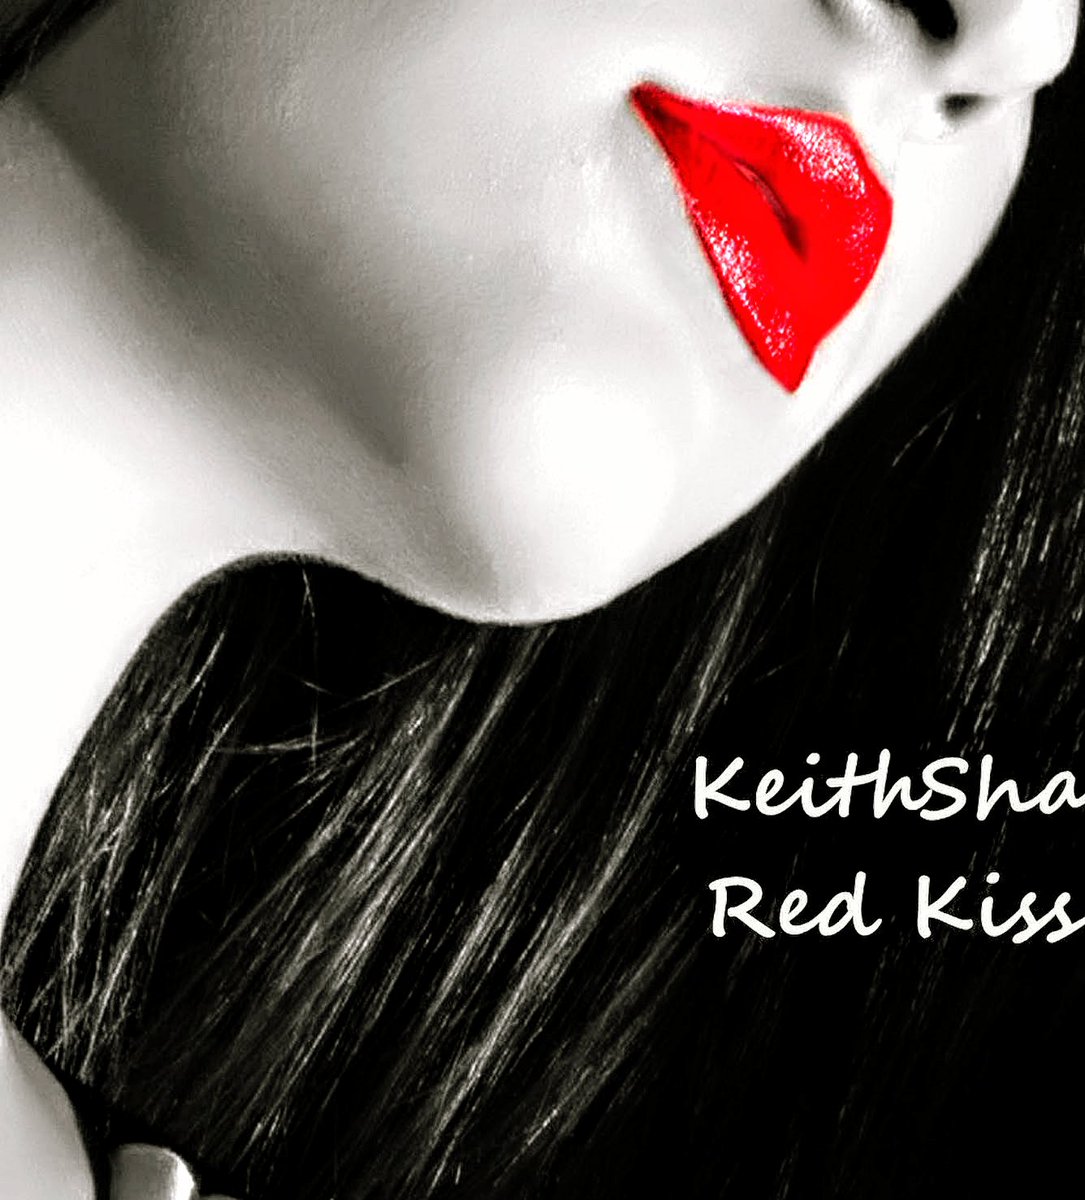 @KeithShawMusic new Red Kisses 💋 @SustaynO21109 Front Row Seat @TolbertToz Now you're Gone @Blokeacolazero Mayonnaise lifestyle @Lunar__Plexus I'll watch over you @homelessradio1 Submarine @theshrubs3 Save our Soul's @UNQUIETNIGHTS Diamond & The missing son